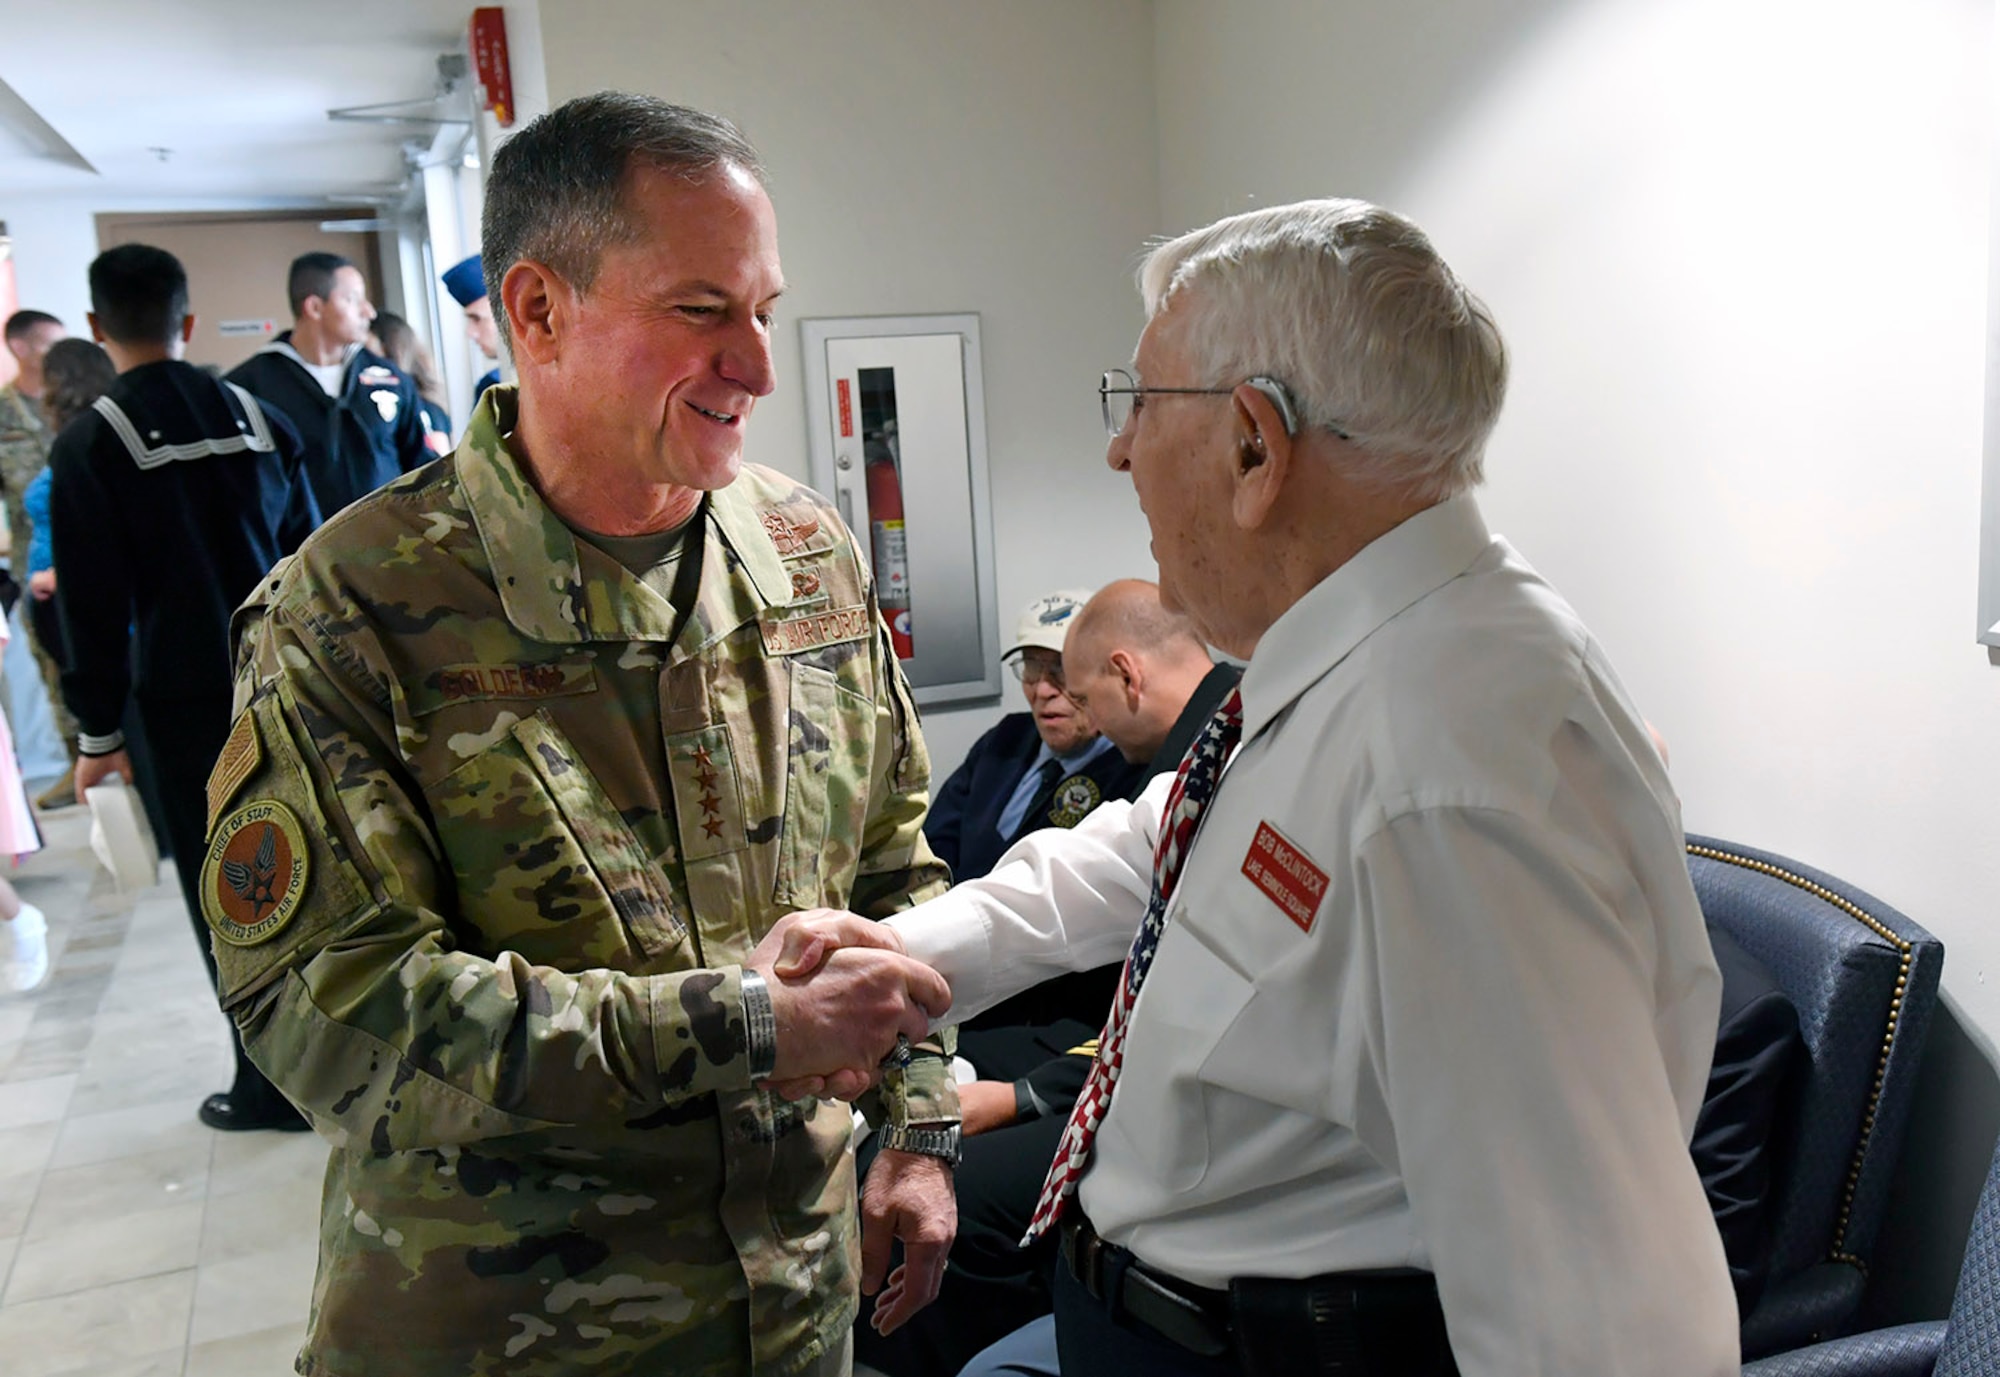 U.S. Air Force Gen. David Goldfein, Chief of Staff of the Air Force, greets 1st Lt. Bob McClintock, a World War II veteran, at a commemoration of the 75th anniversary of the D-Day invasion at MacDill Air Force Base, Fla., June 6, 2019.